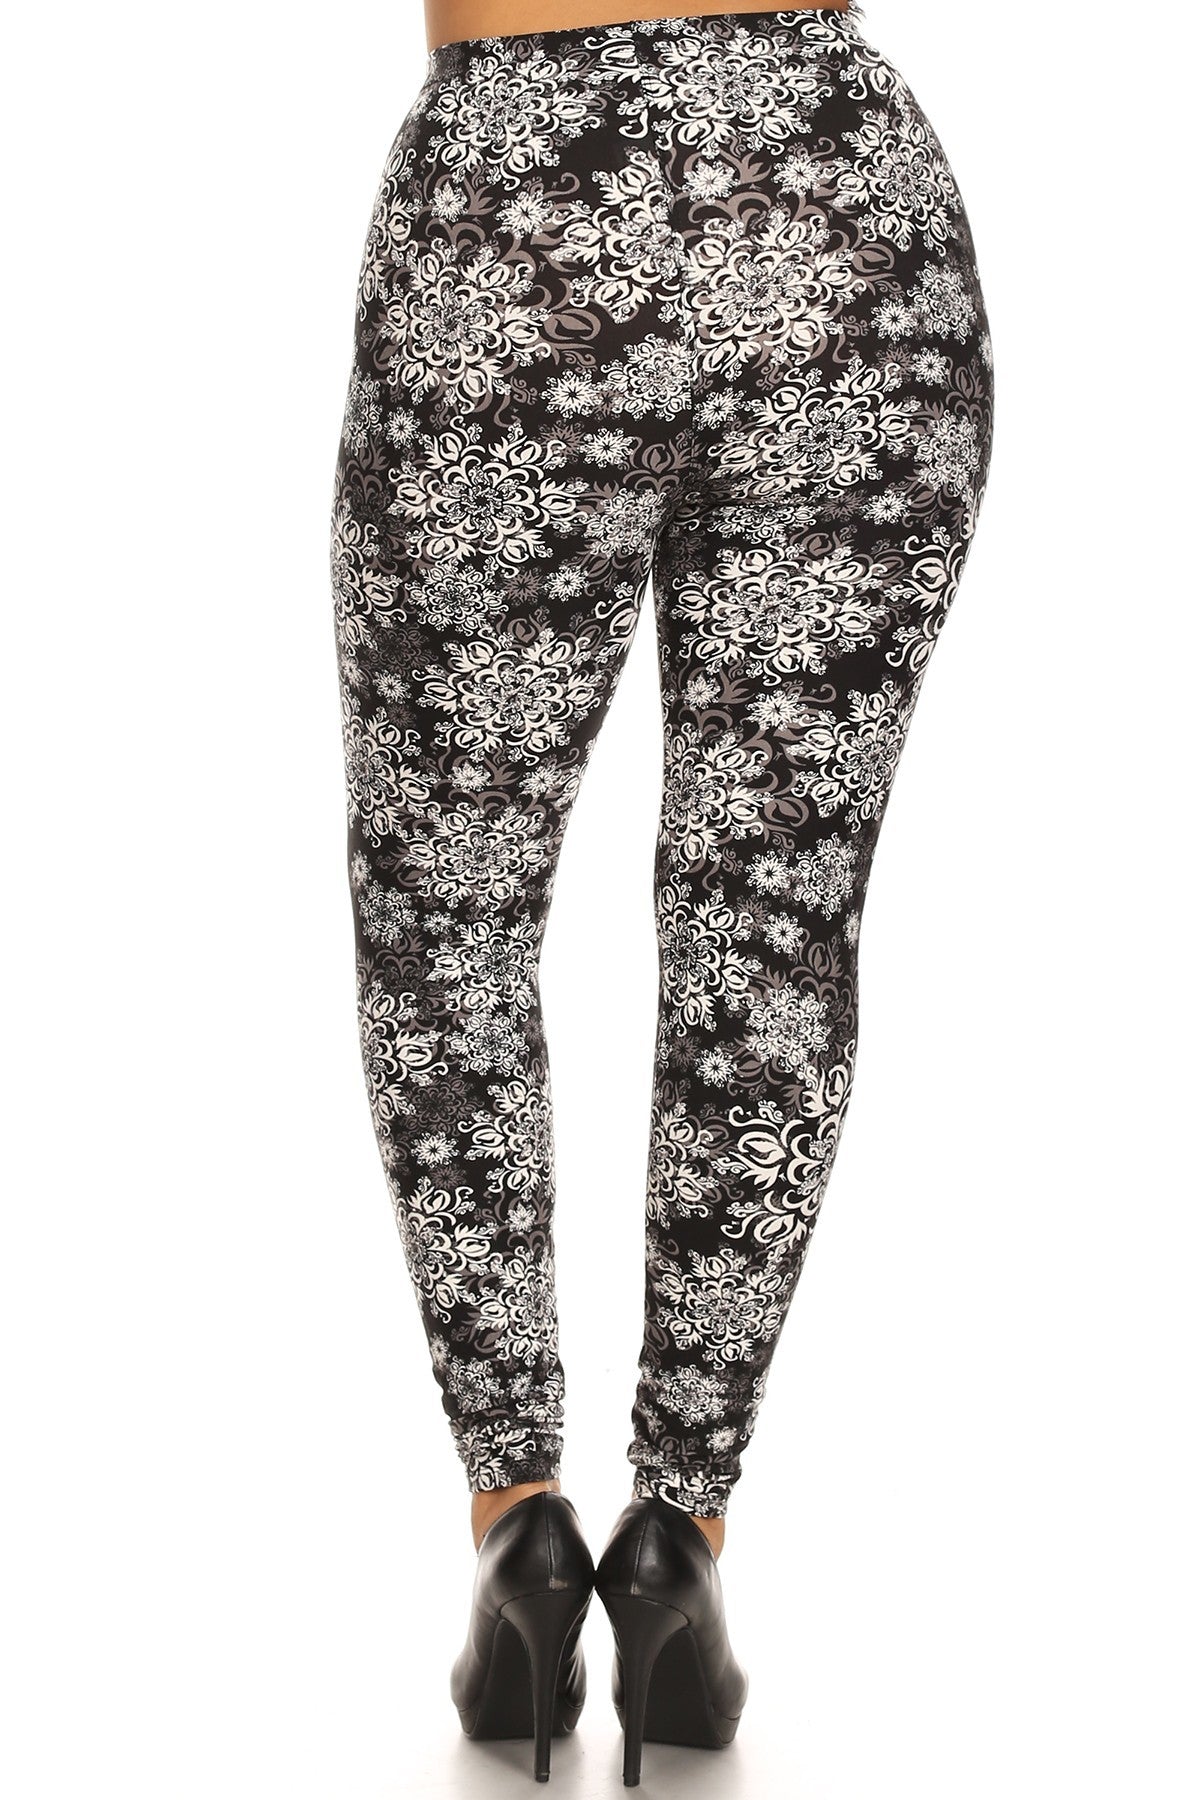 MULTI ONE SIZE FITS MOST - Voluptuous (+) Plus Size Abstract Print, Full Length Leggings - Ships from The USA - womens leggings at TFC&H Co.